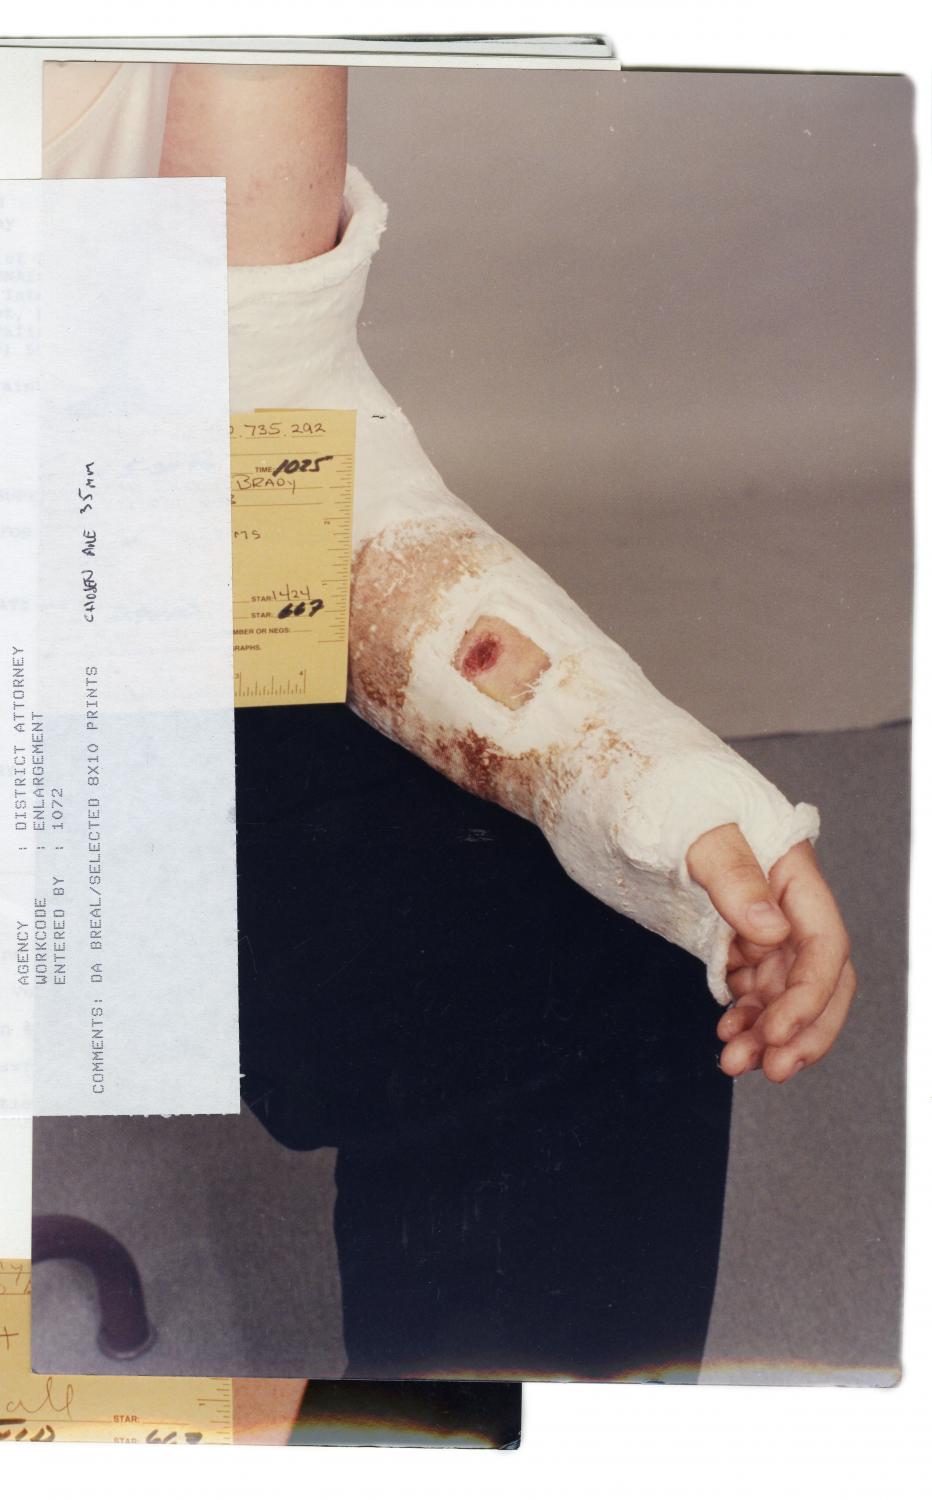 Archives of Abuse - Police photo of Amy's arm after her attack, 1995